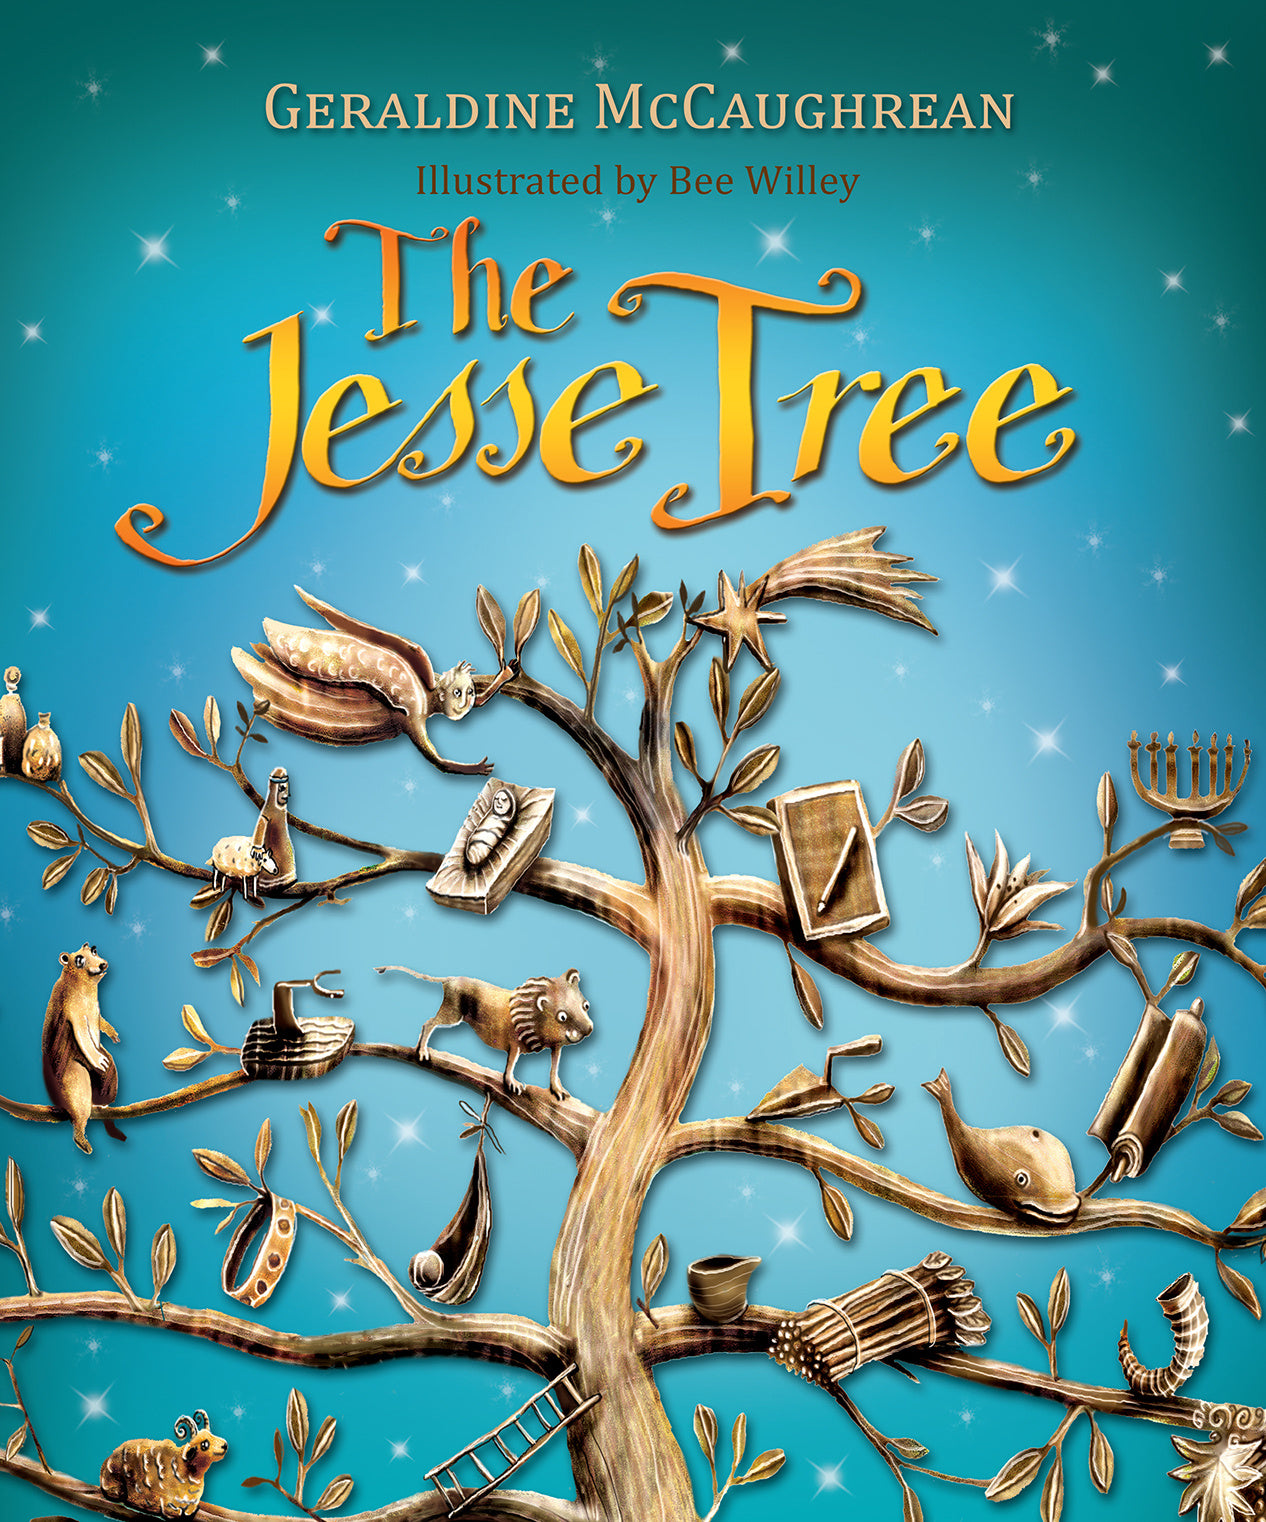 Image of Jesse Tree other